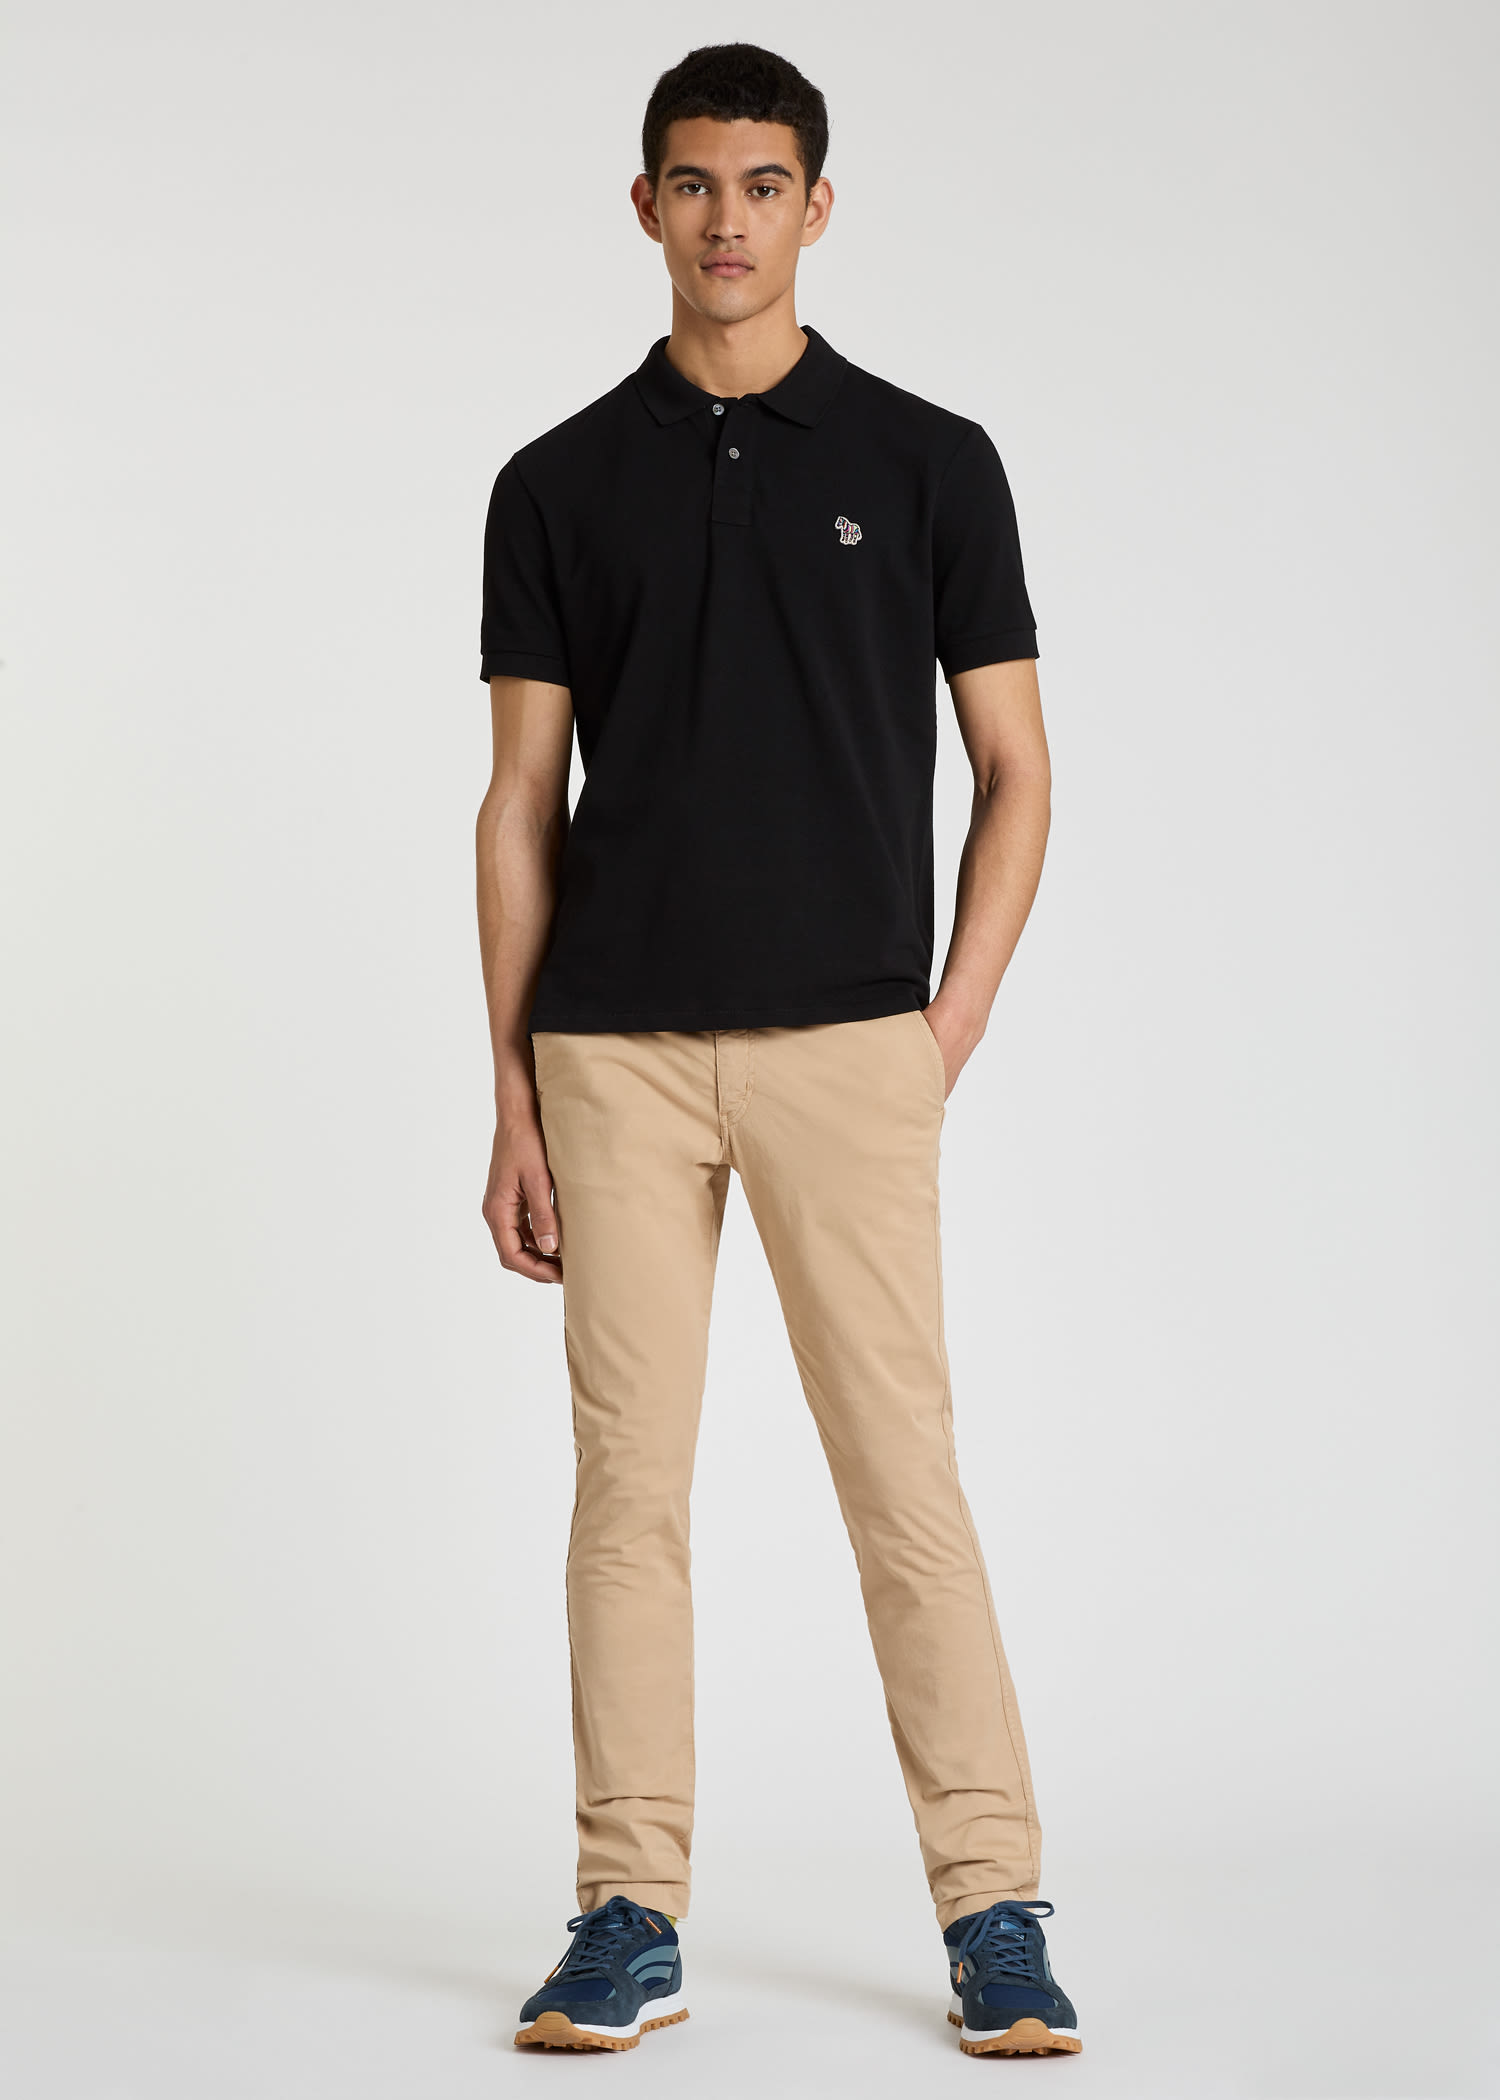 Details about   Paul Smith Zebra Badge Regular Fit Short Sleeve Polo Shirt T-Shirt in Black 